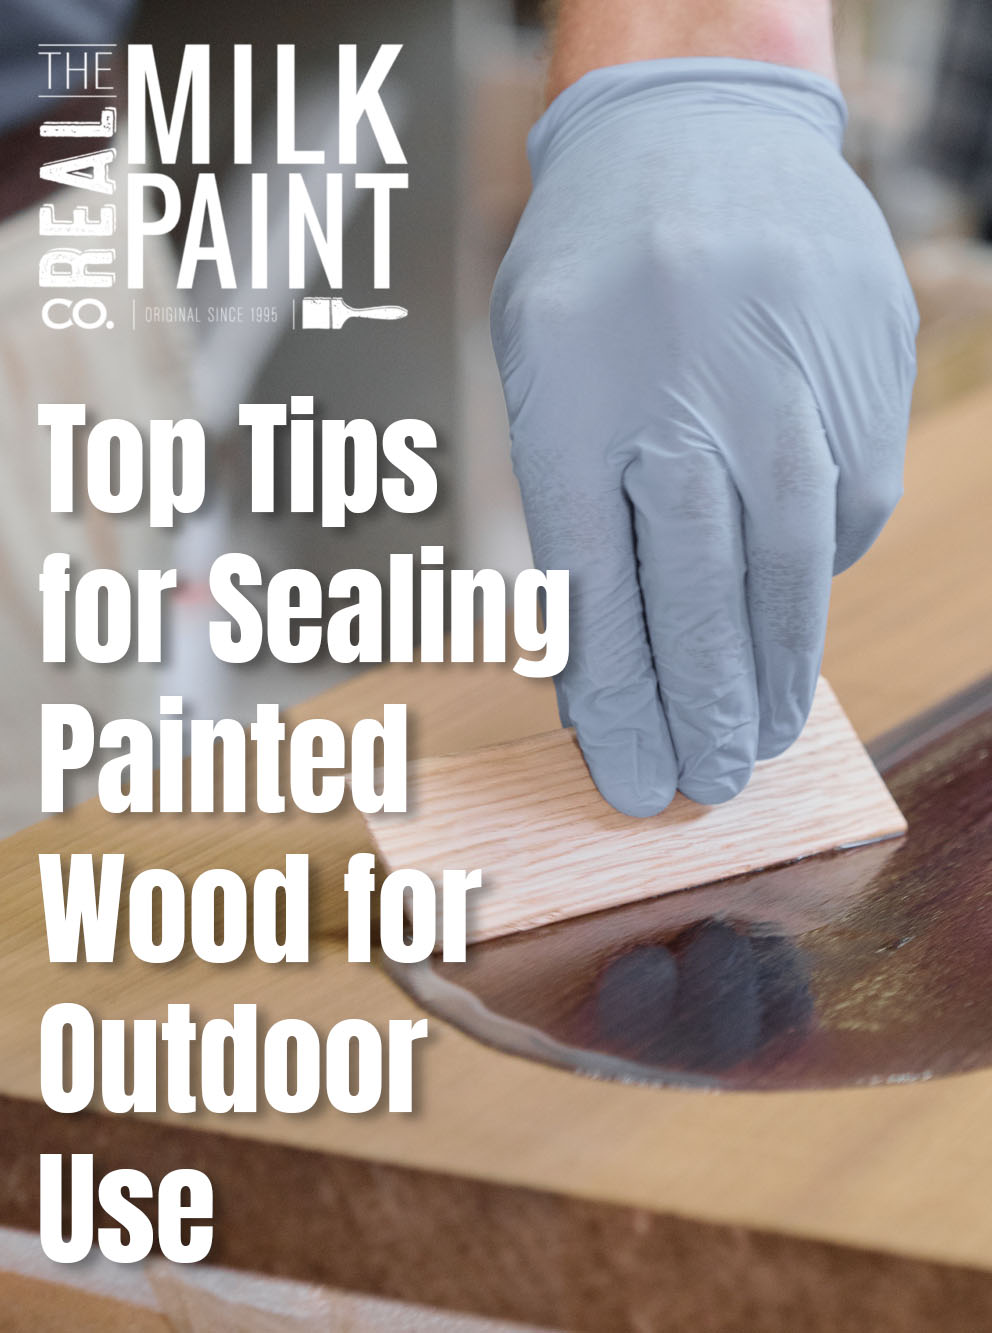 Top Tips for Sealing Painted Wood for Outdoor Use